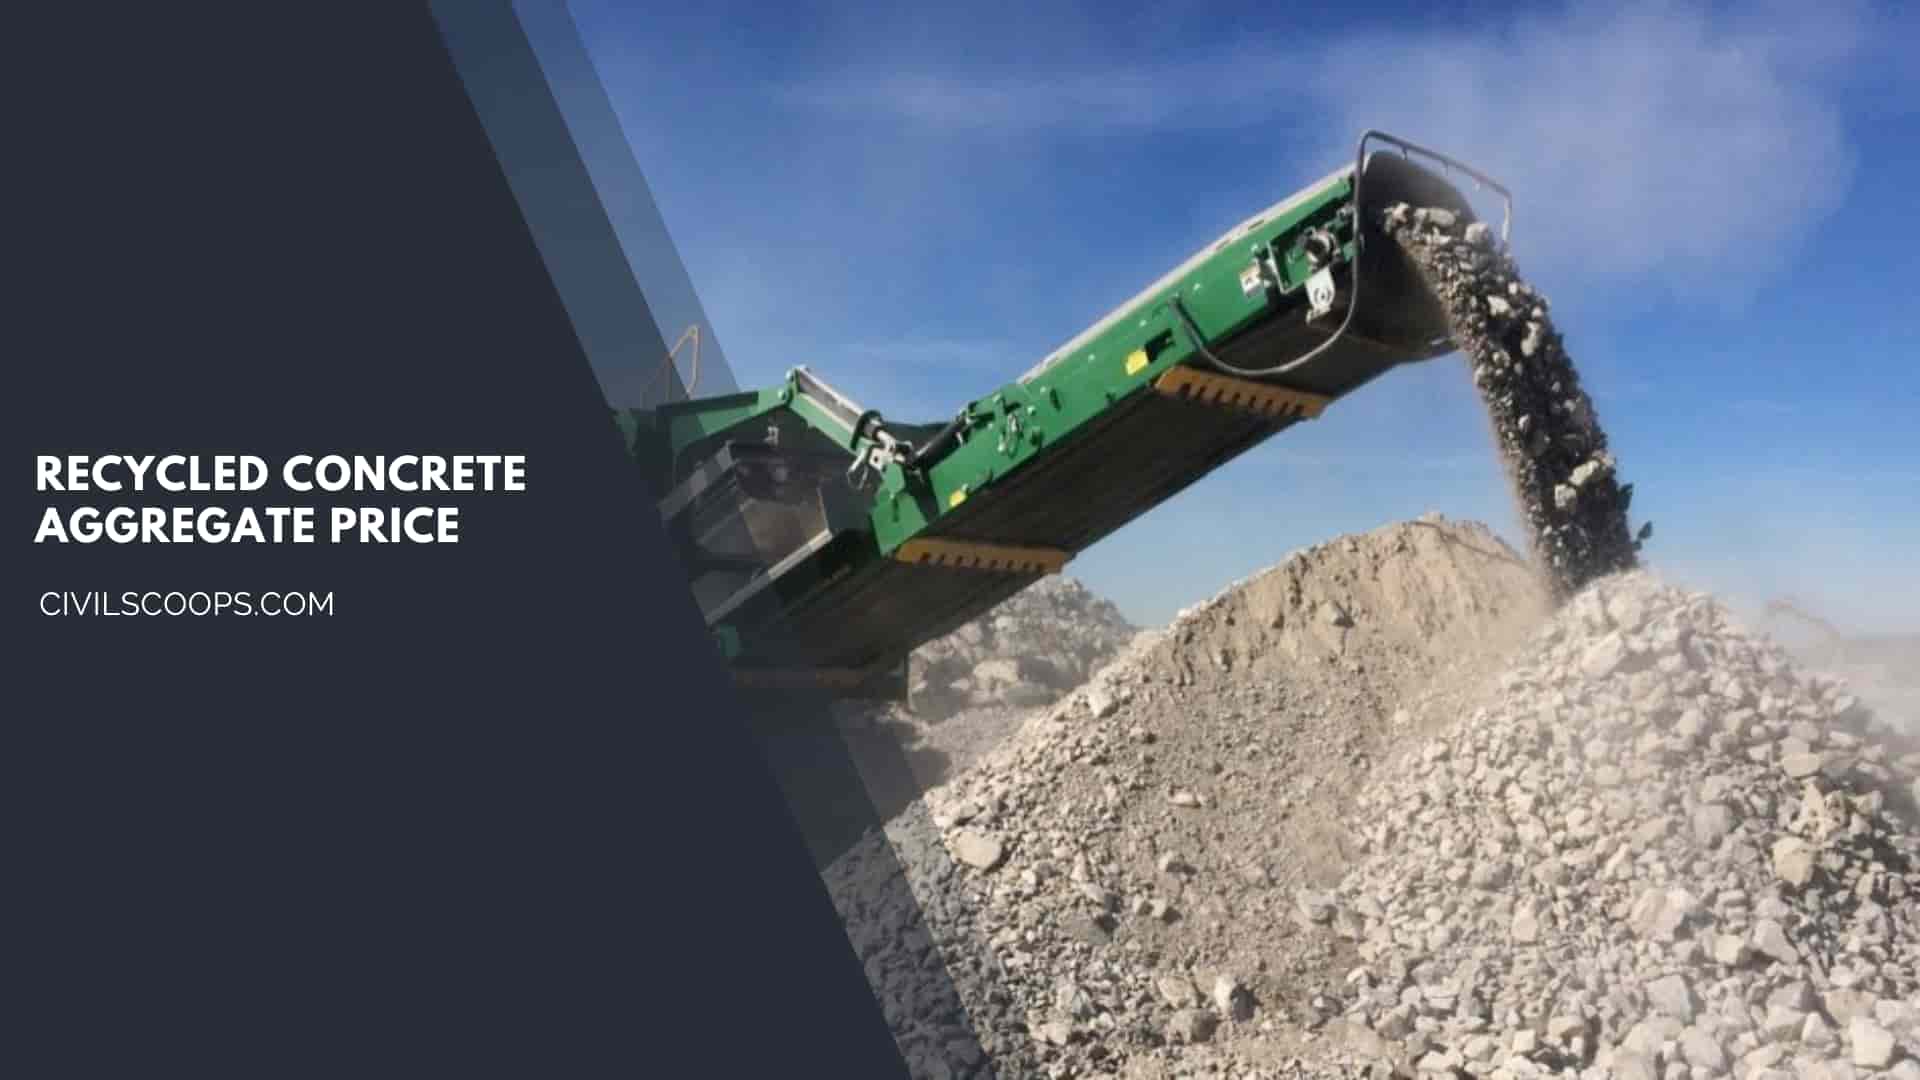 Recycled Concrete Aggregate Price